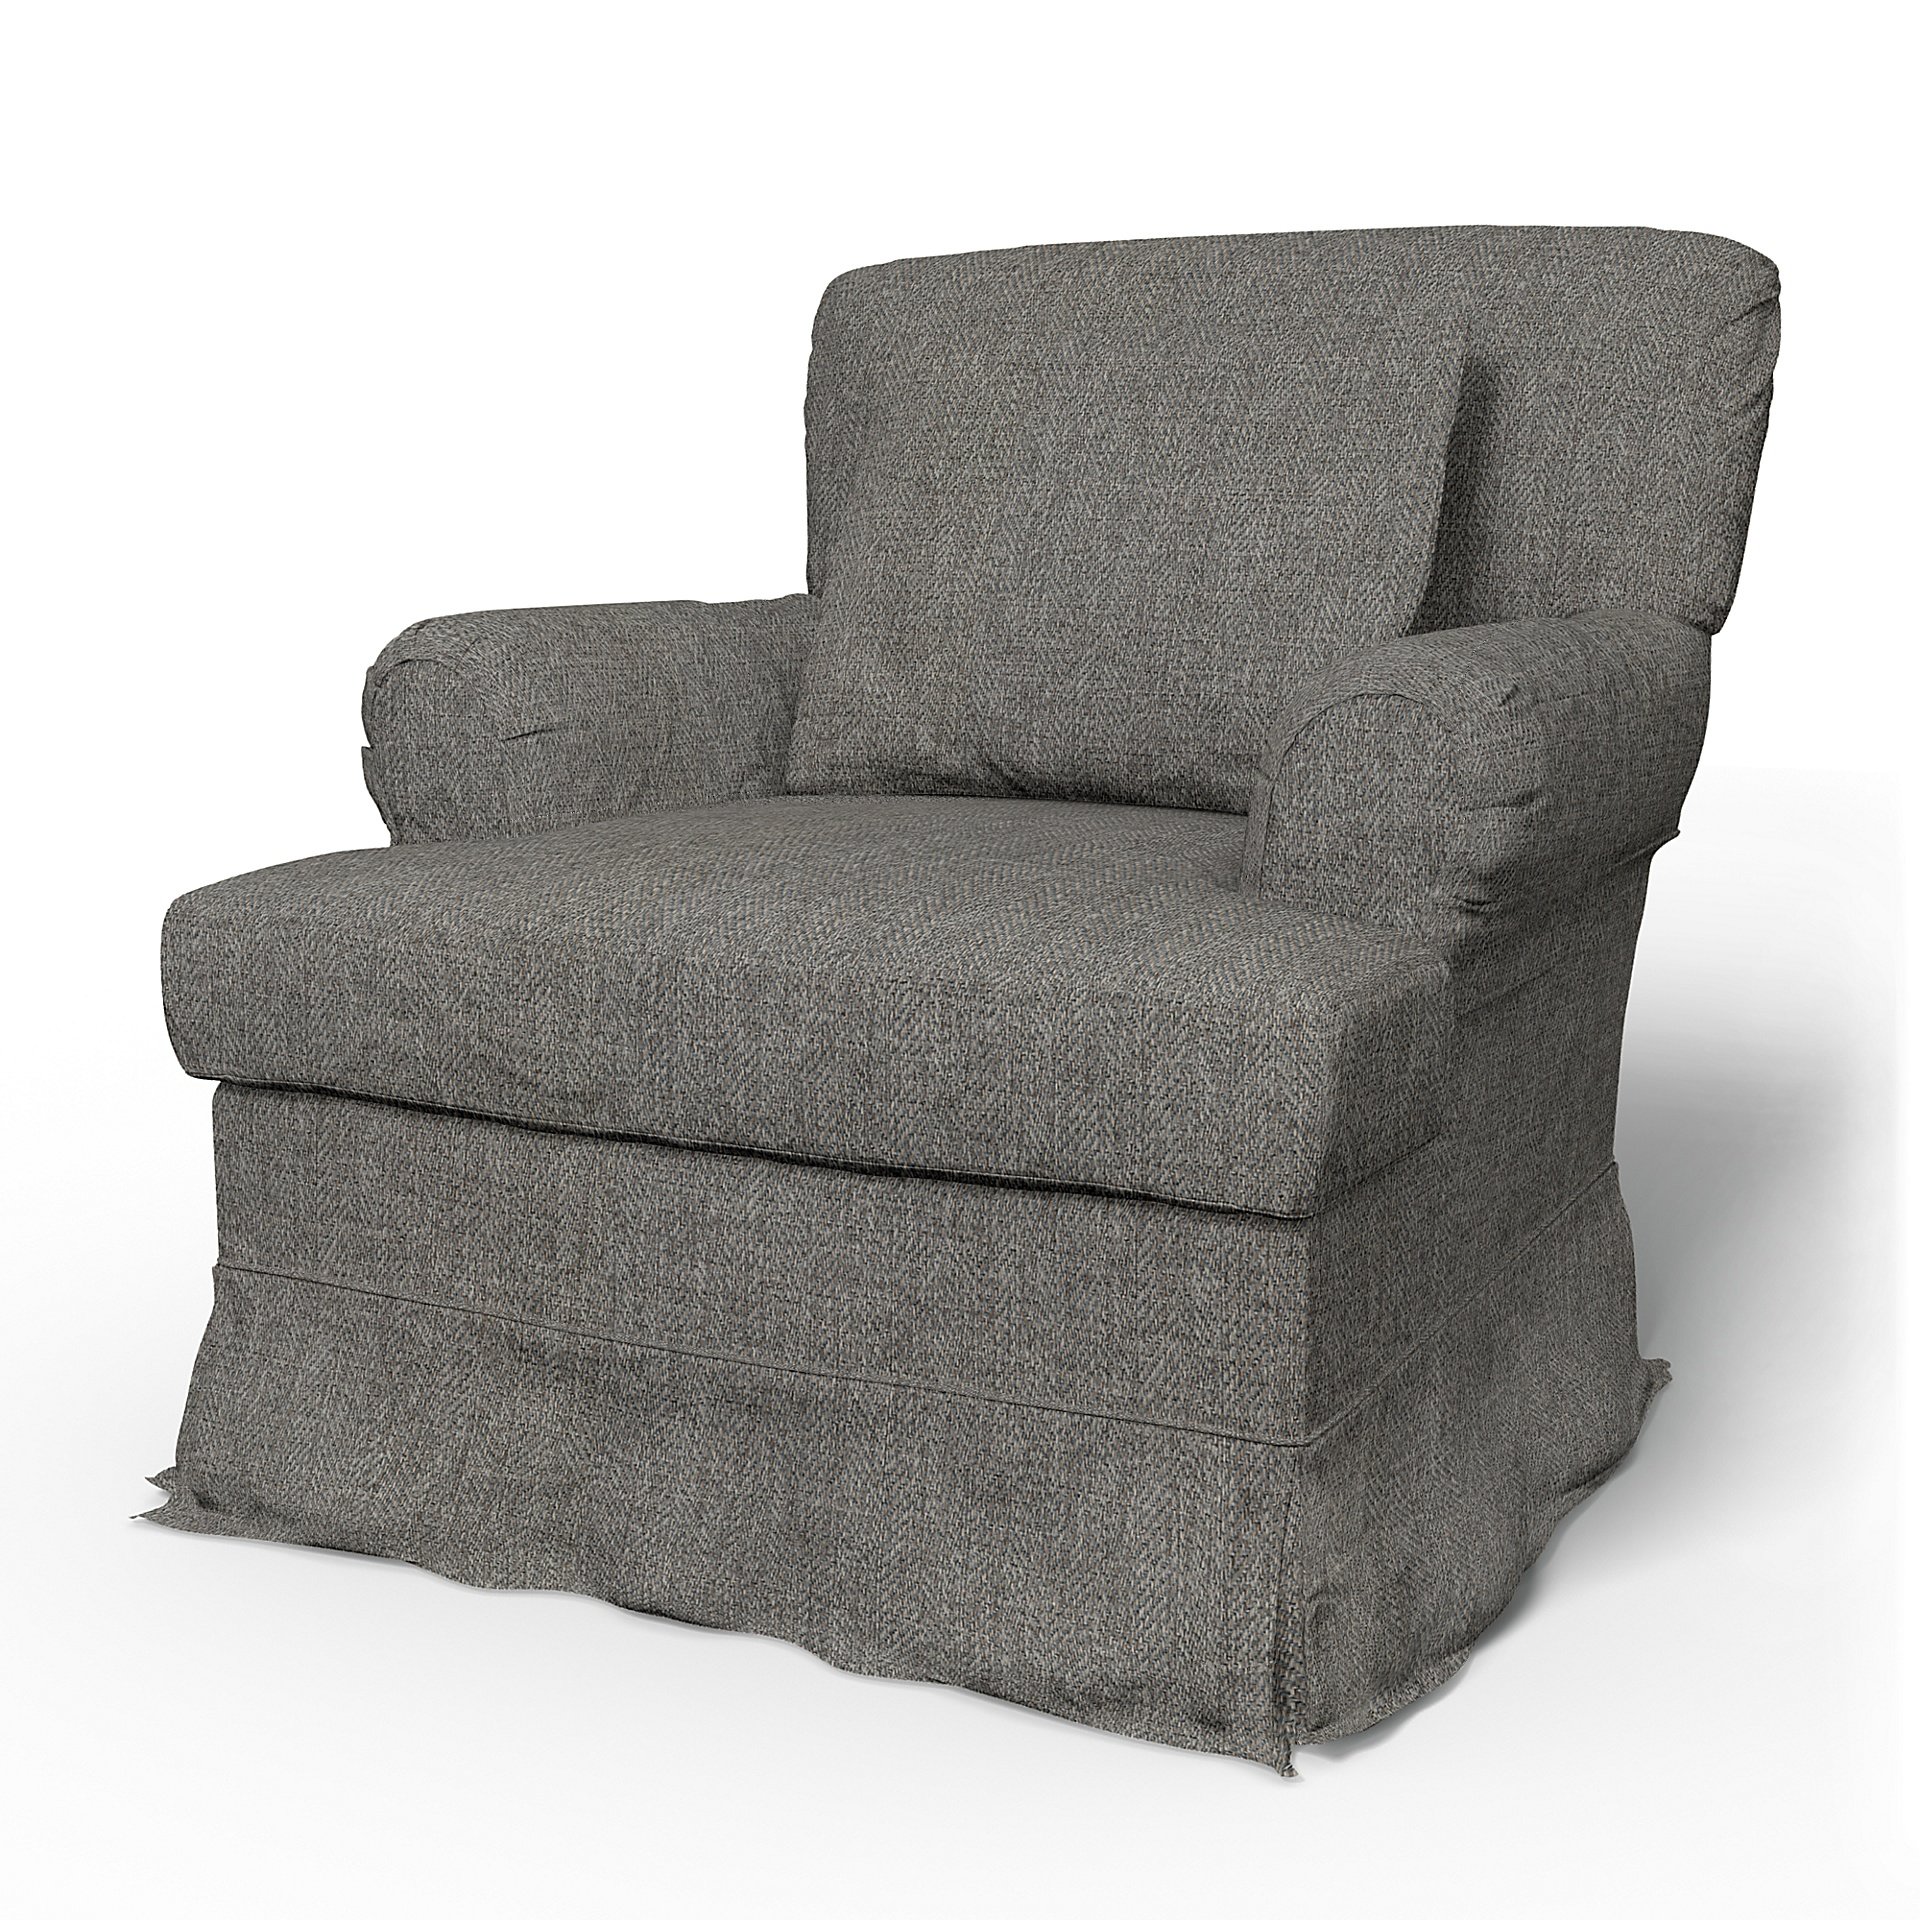 IKEA - Stockholm Armchair Cover (1994-2000), Taupe, Boucle & Texture - Bemz